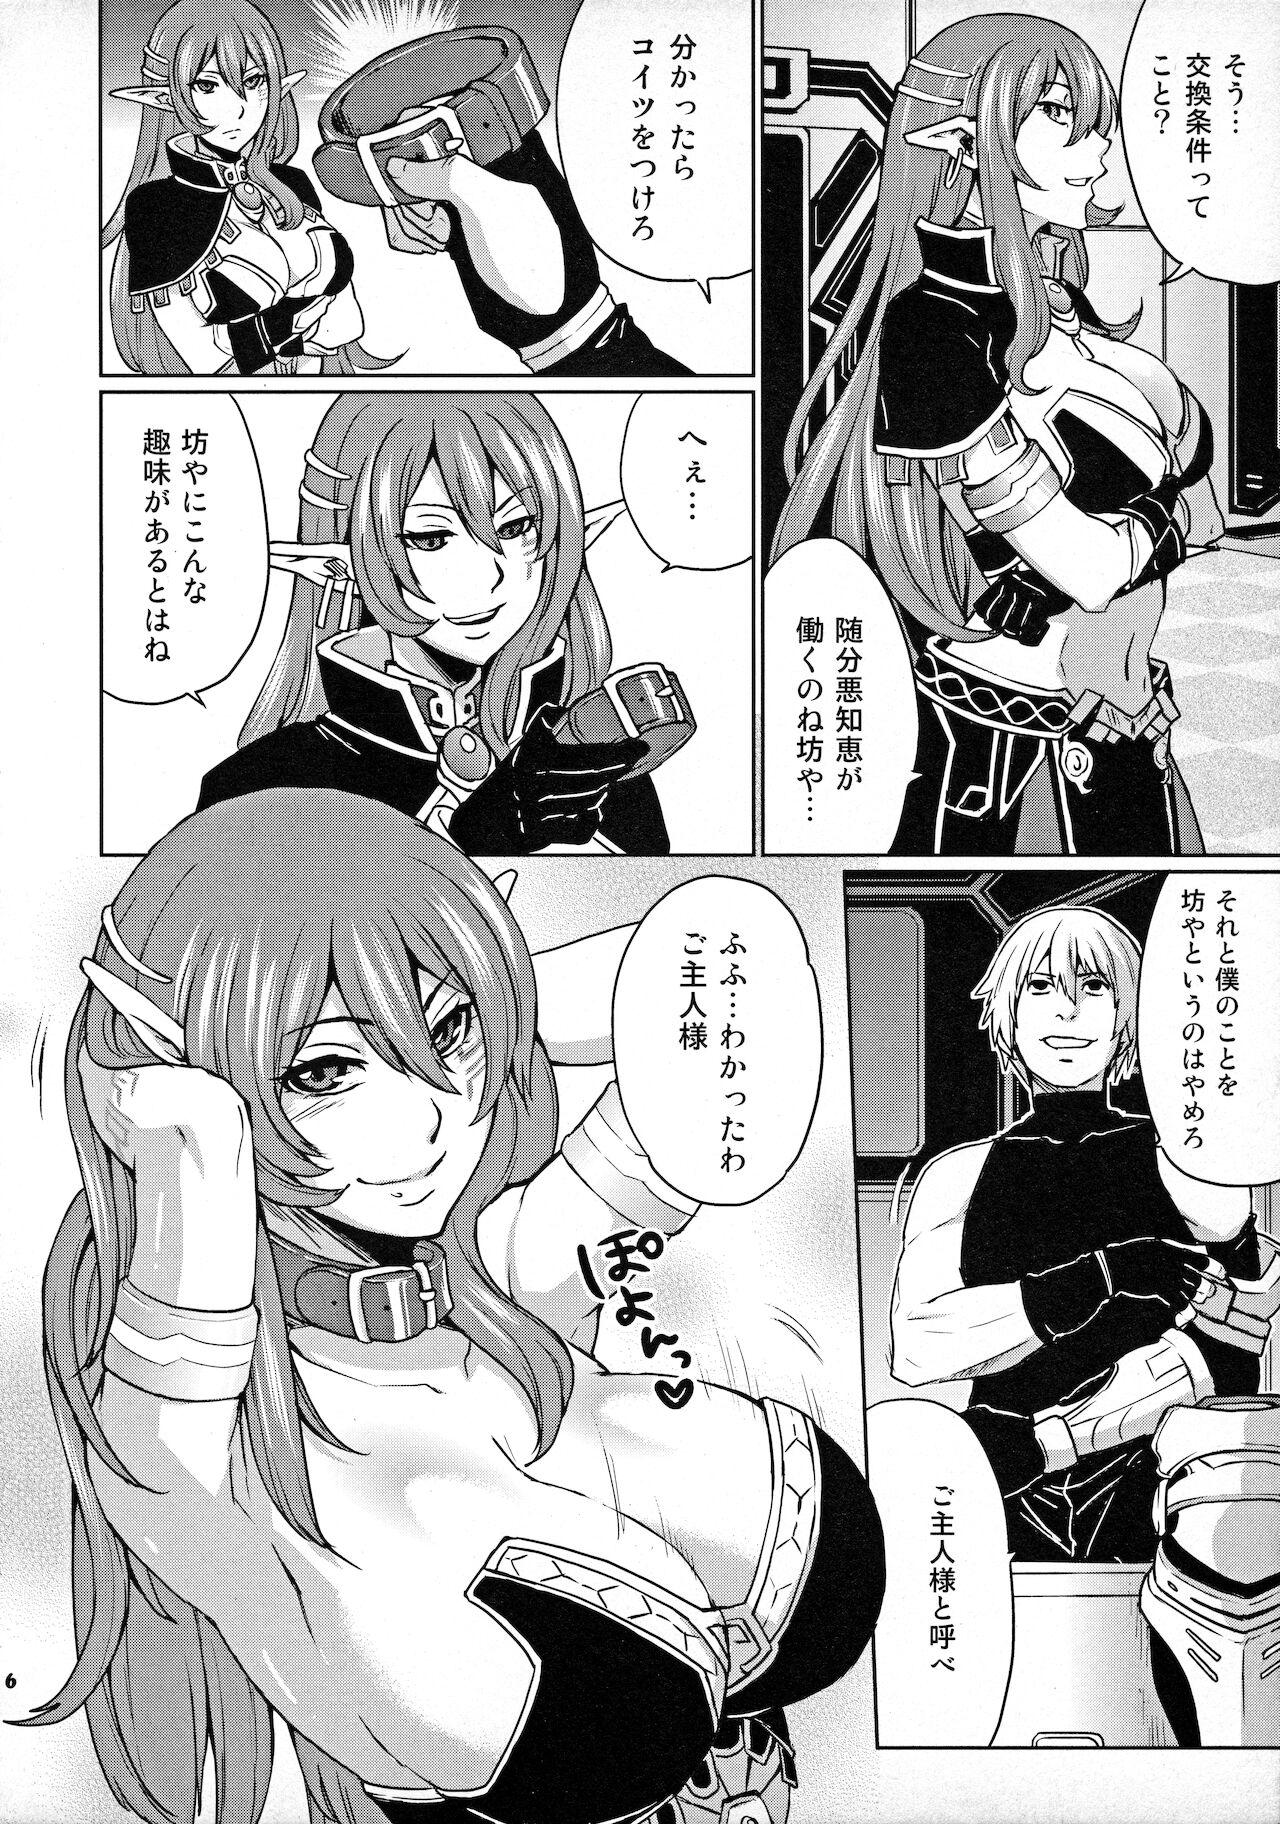 Mexicana Hoshi no Umi no Miboujin - The Widow of The Star Ocean - Star ocean 4 Gay Straight - Page 5